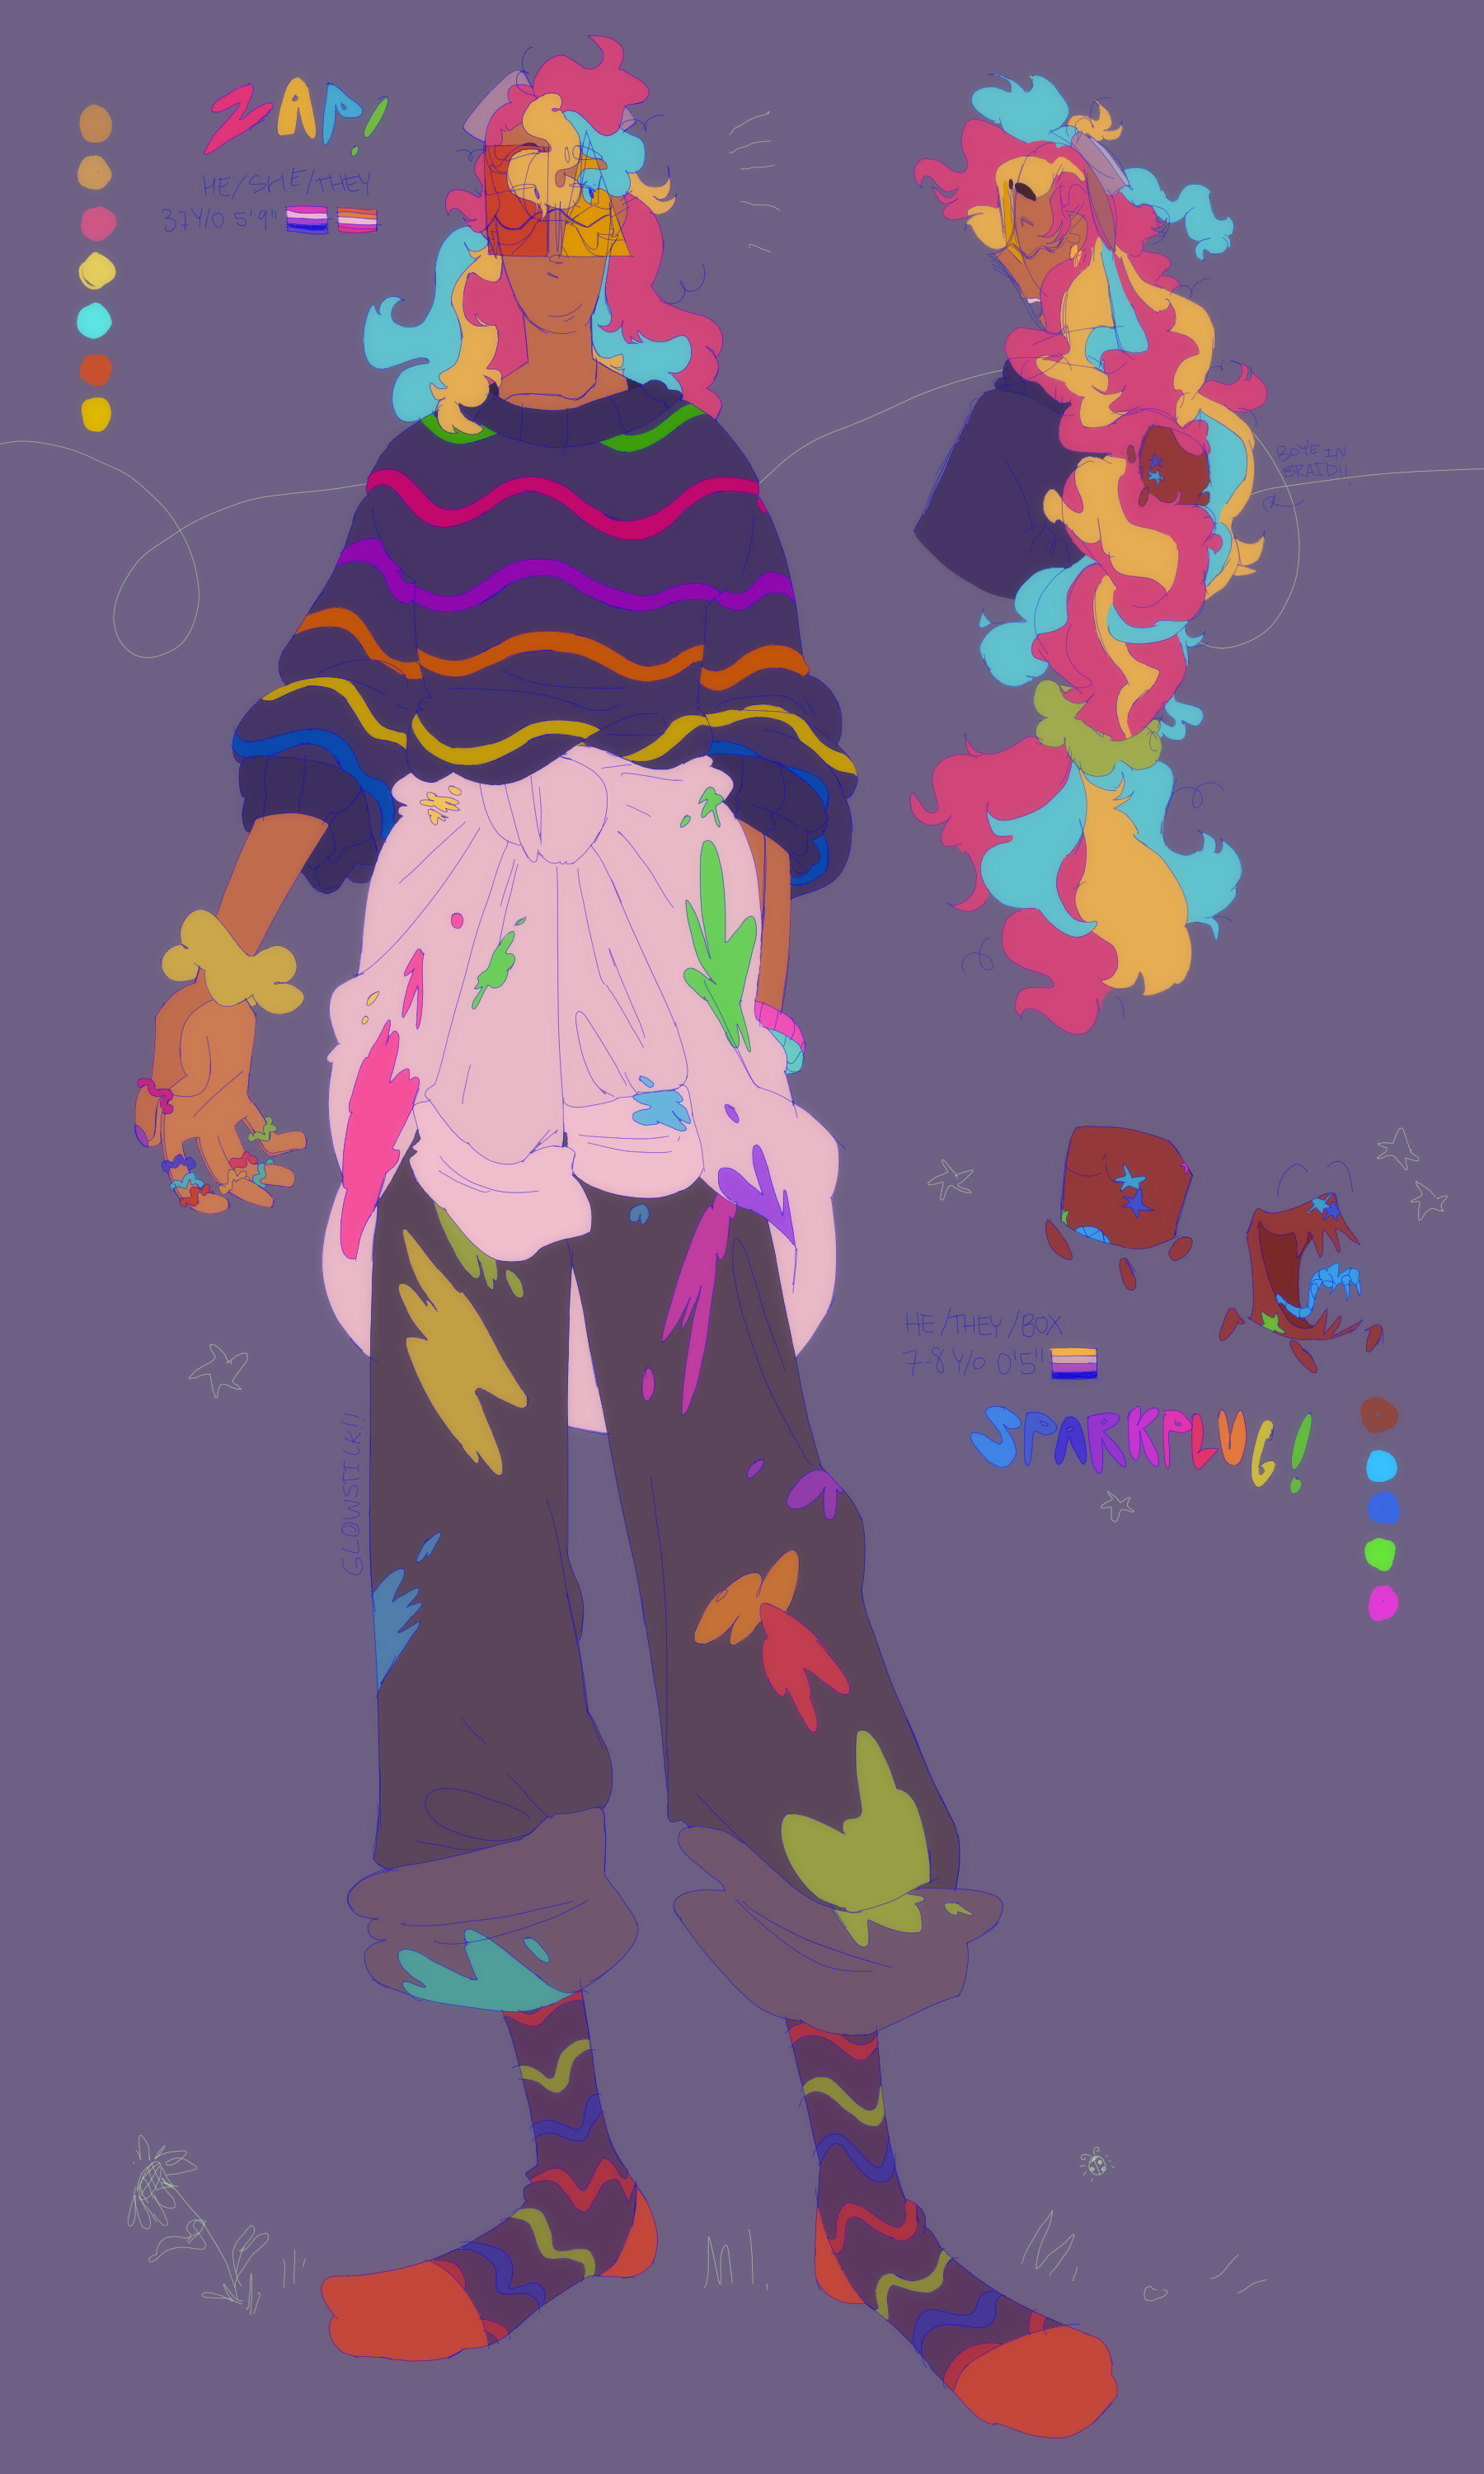 A reference sheet for Zap and Sparkplug. Zap's hair is woven into a braid, and he is wearing a black sweater with rainbow squiggles, matching socks, and paint splattered pants. Her labcoat is tied around her waist and he has several small colorful bands on each of his fingers. Sparkplug is a small brown cube with a blue tongue shaped like a rubber sticky hand. They have no eyes, so most of their body is their mouth. There is an image in the top left of Zap talking to someone out-of-picture, while Sparkplug is nestled happily into their braid. The text next to Zap has his name in colorful block letters, and reads 'He/she/they, 32 y/o, 5 foot 9 inches' and has small hand-drawn graphics of the genderfluid and lesbian flags. The text next to Sparkplug has their name in block letters similarly, and reads 'He/they/box, 7-8 y/o, 0 foot 5 inches' with the nonbinary flag in the same style.